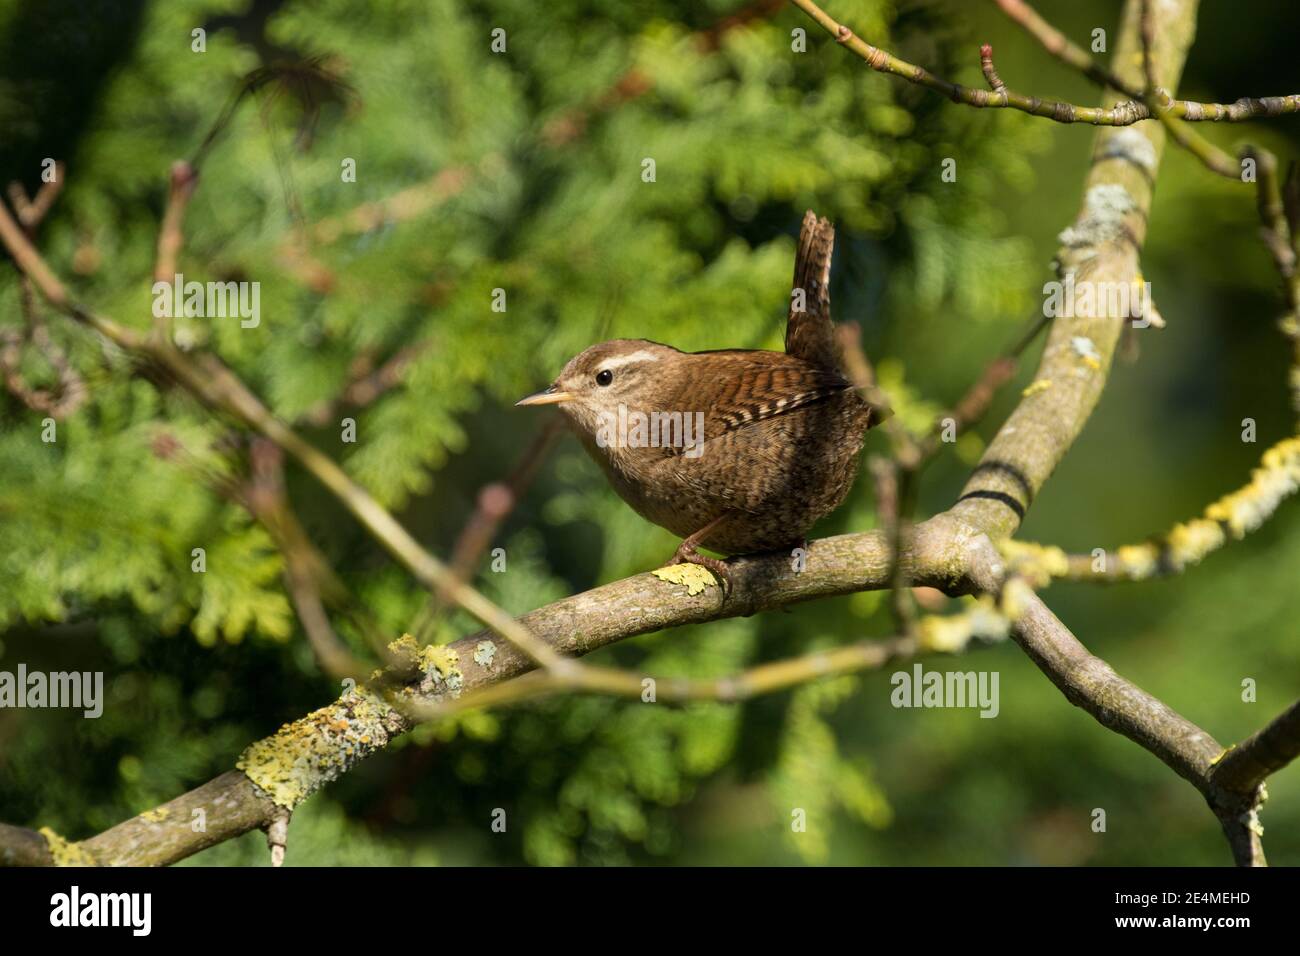 Dumpy, bland brown wren perched on a tree branch in The Valley Gardens, Harrogate, North Yorkshire, England, UK. Stock Photo